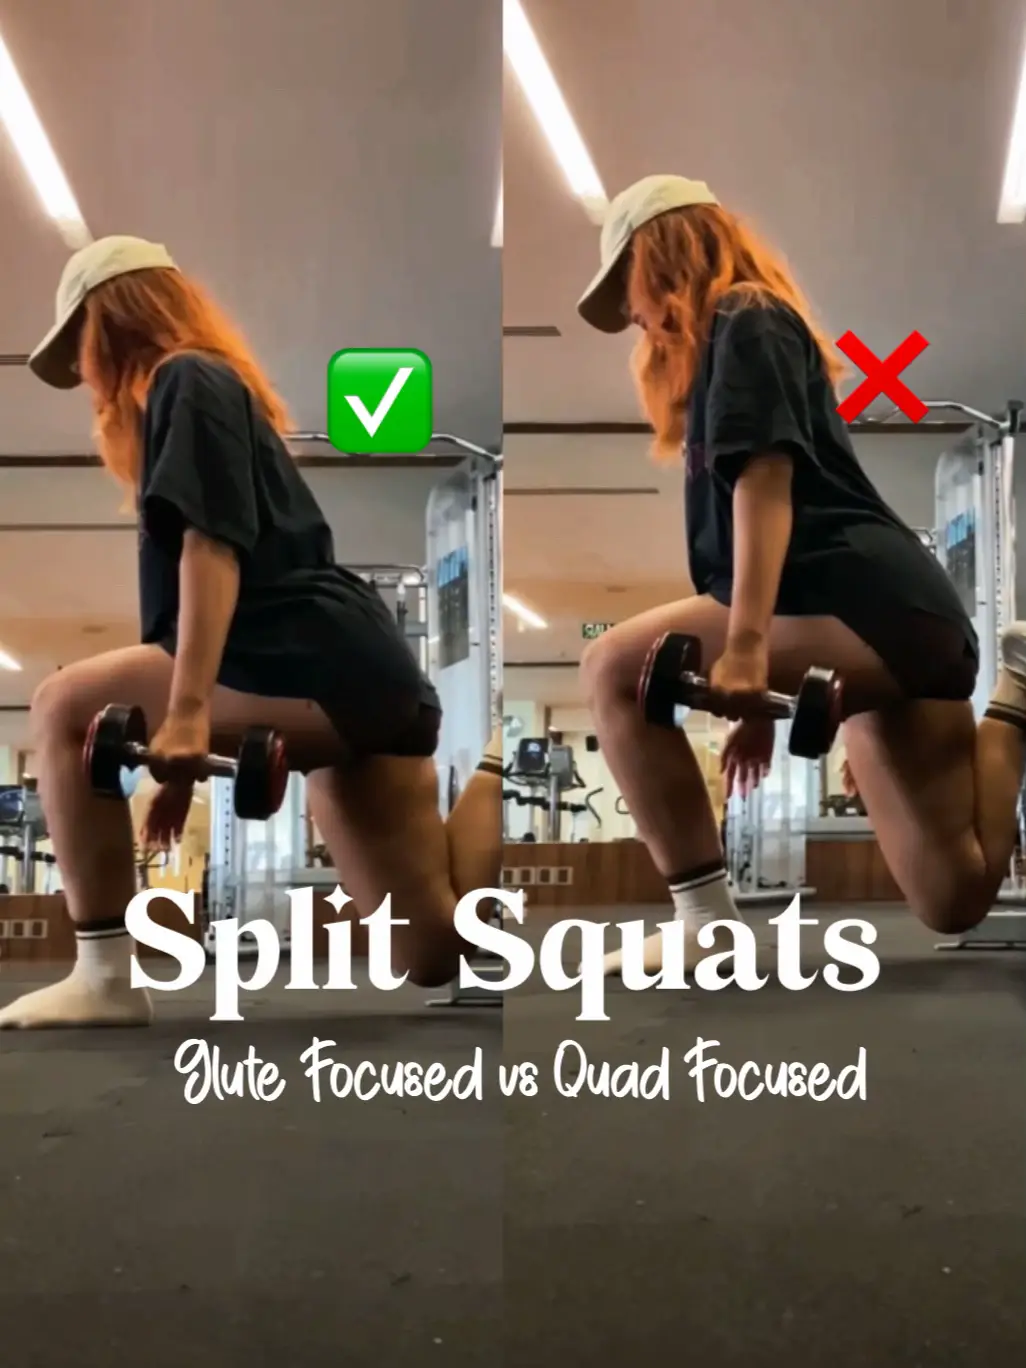 How important are your glutes in a Side Split?